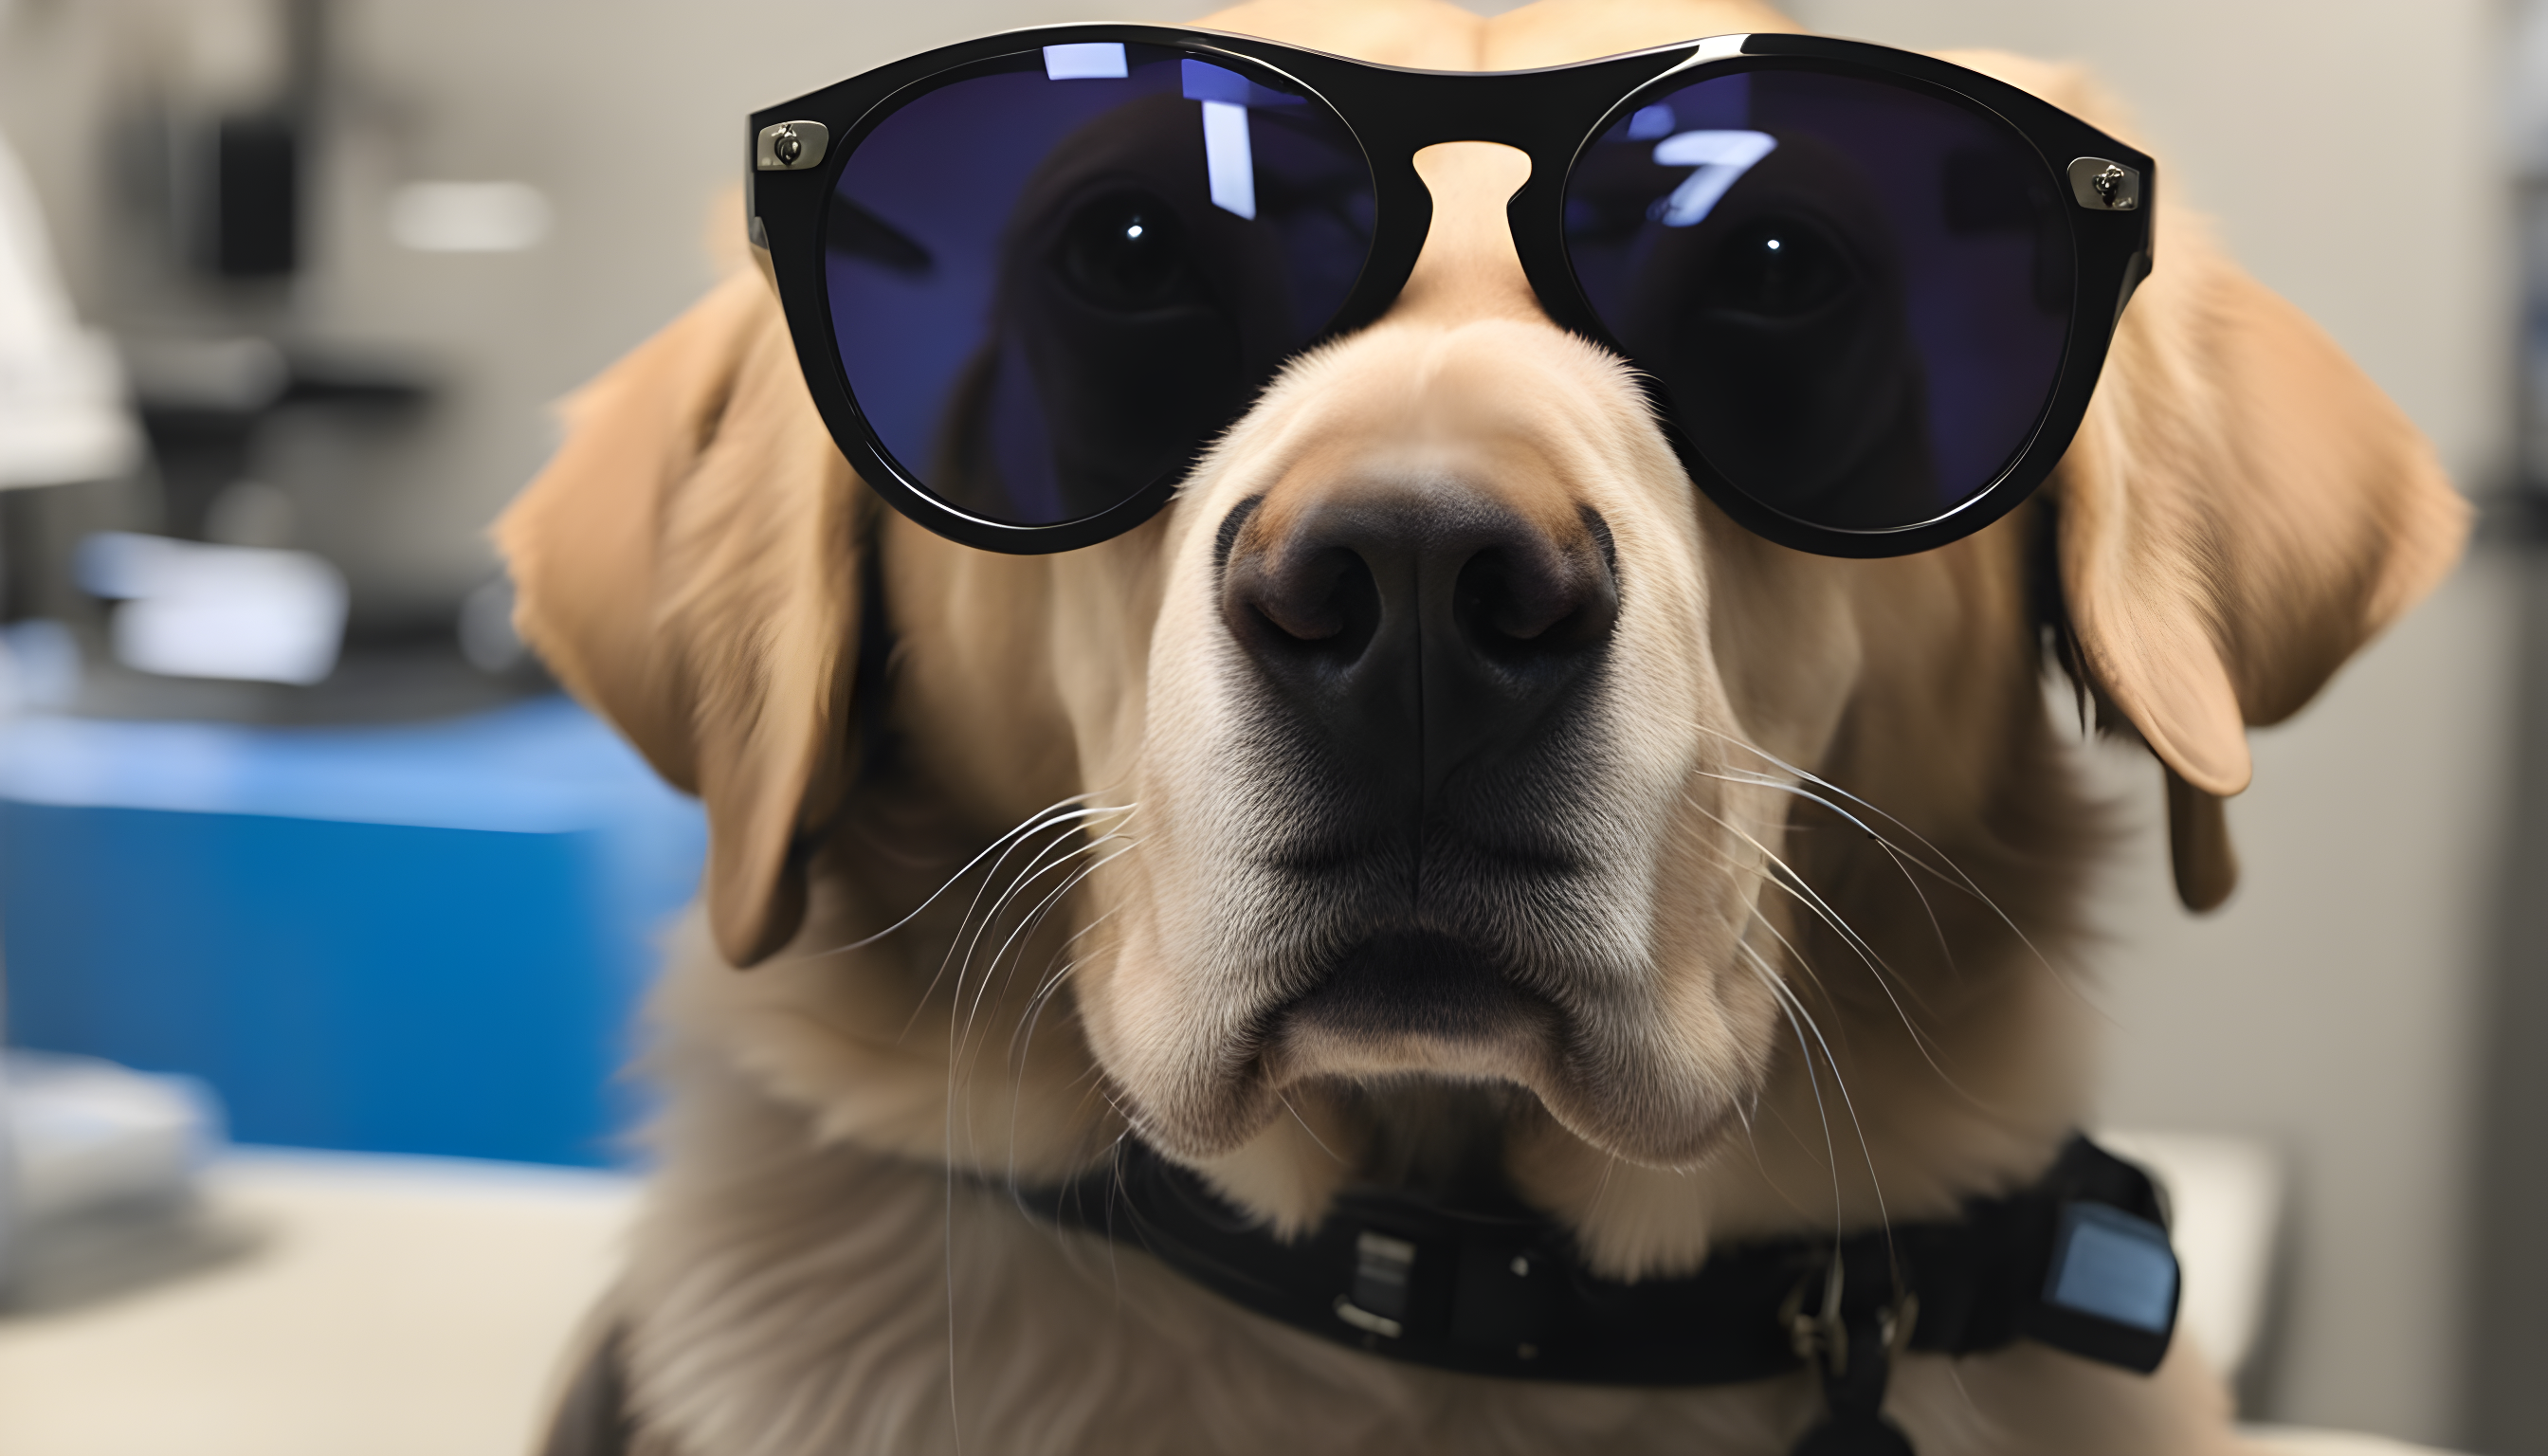 British Lab rocking a pair of oversized sunglasses during a vet check-up because style never takes a day off!